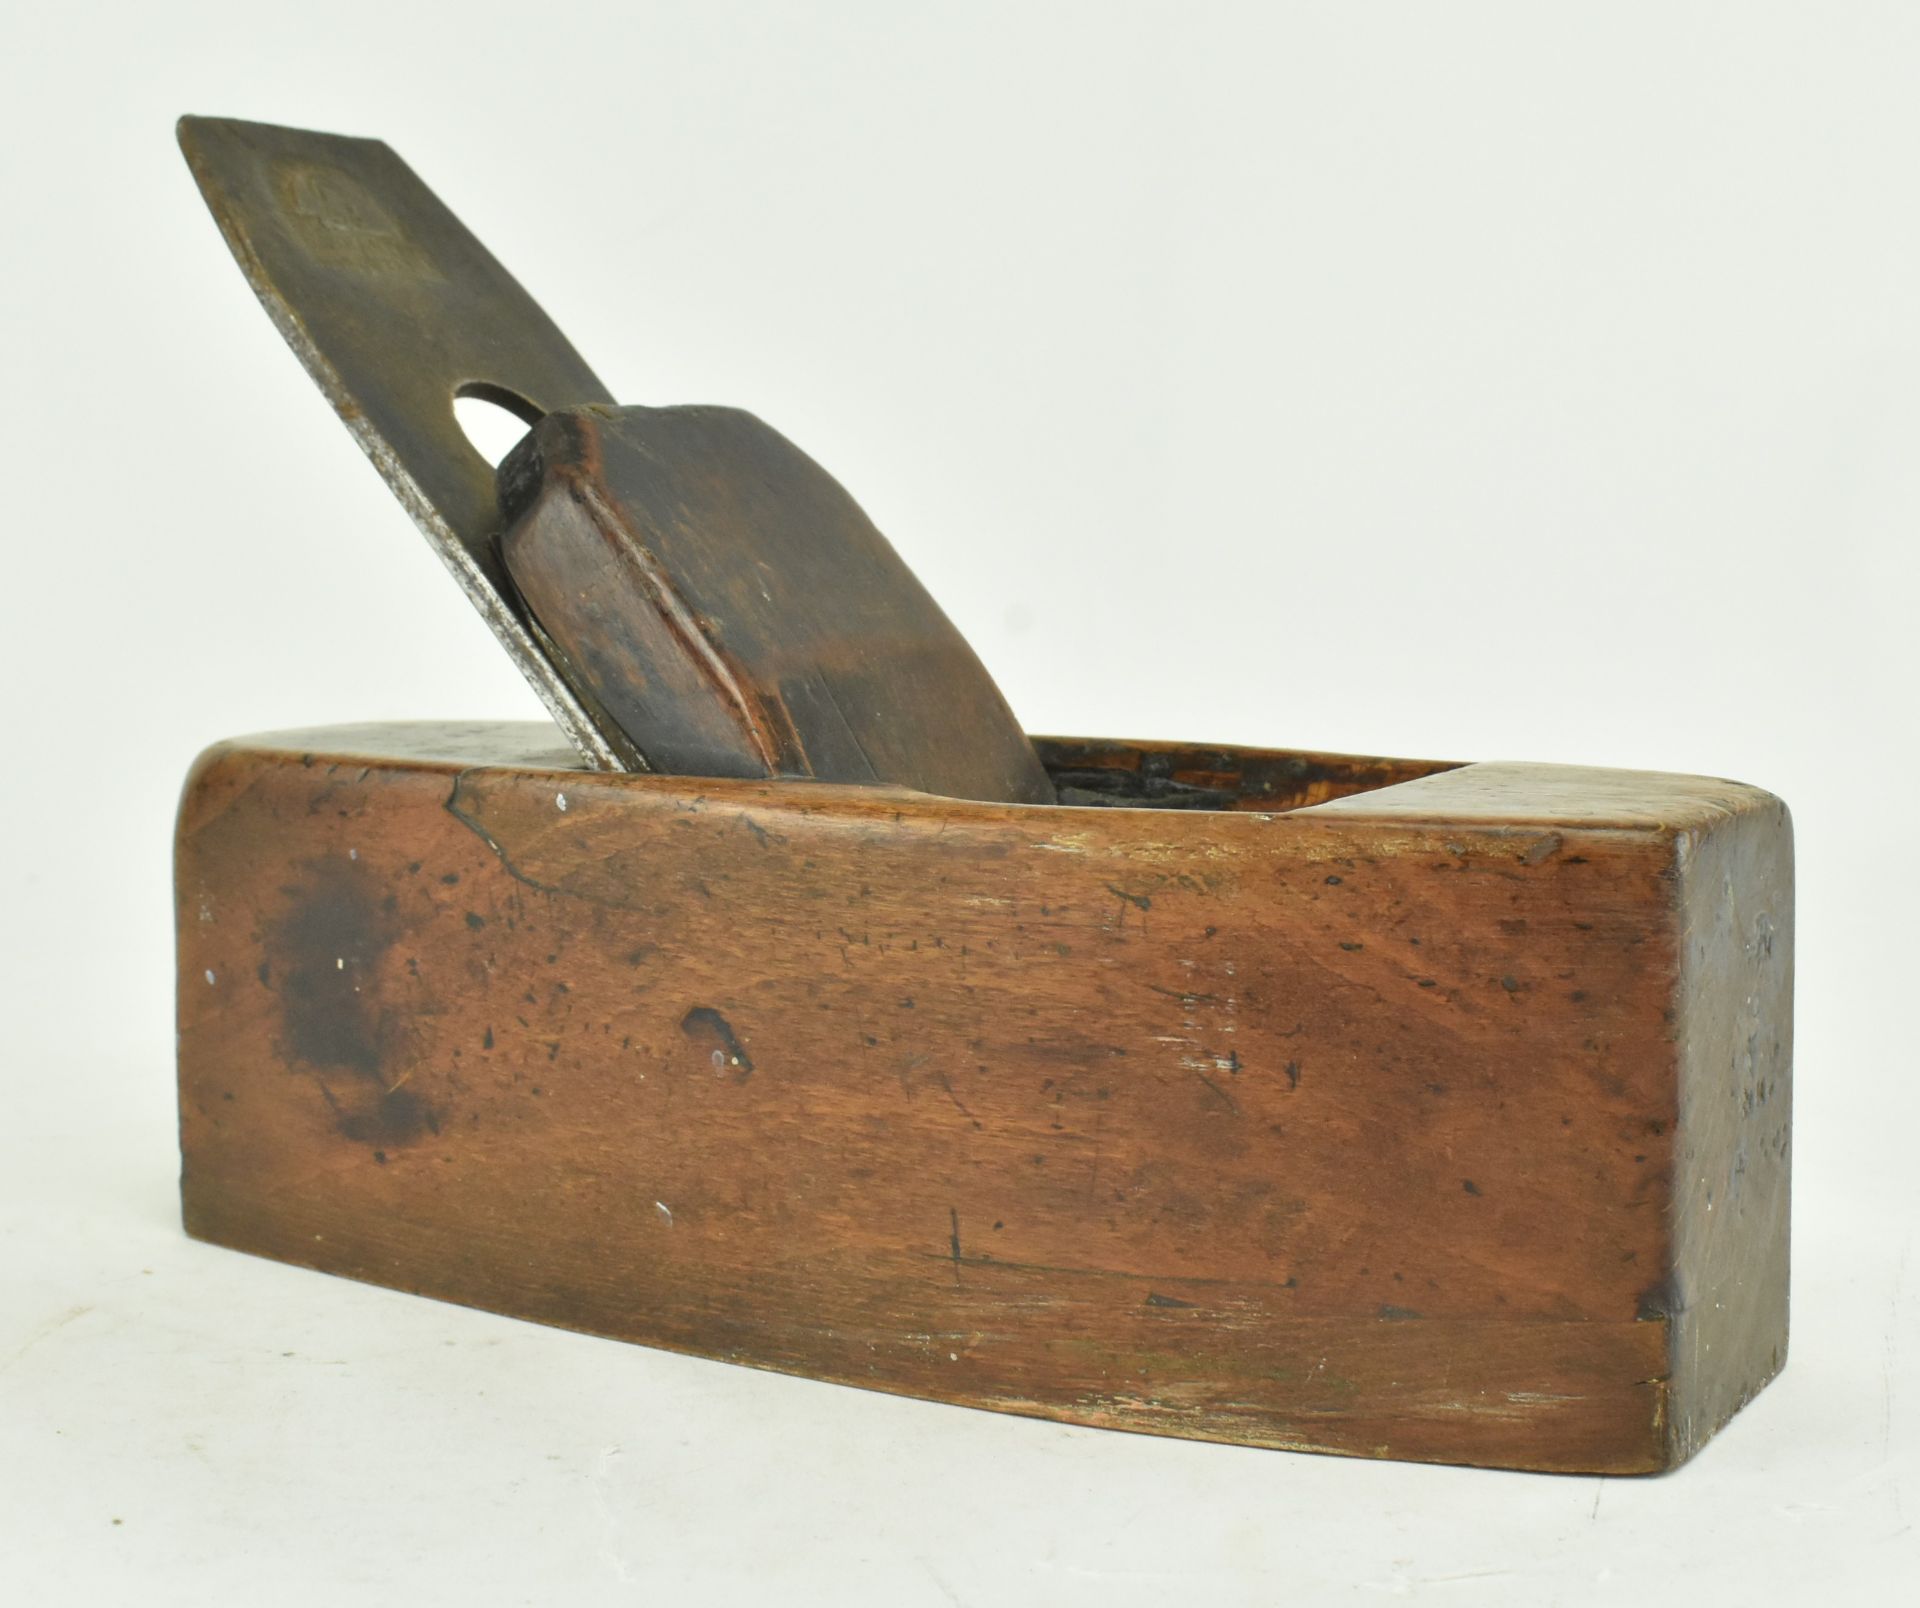 WOODWORKING - A 19TH CENTURY CARPENTER'S WOOD PLANE